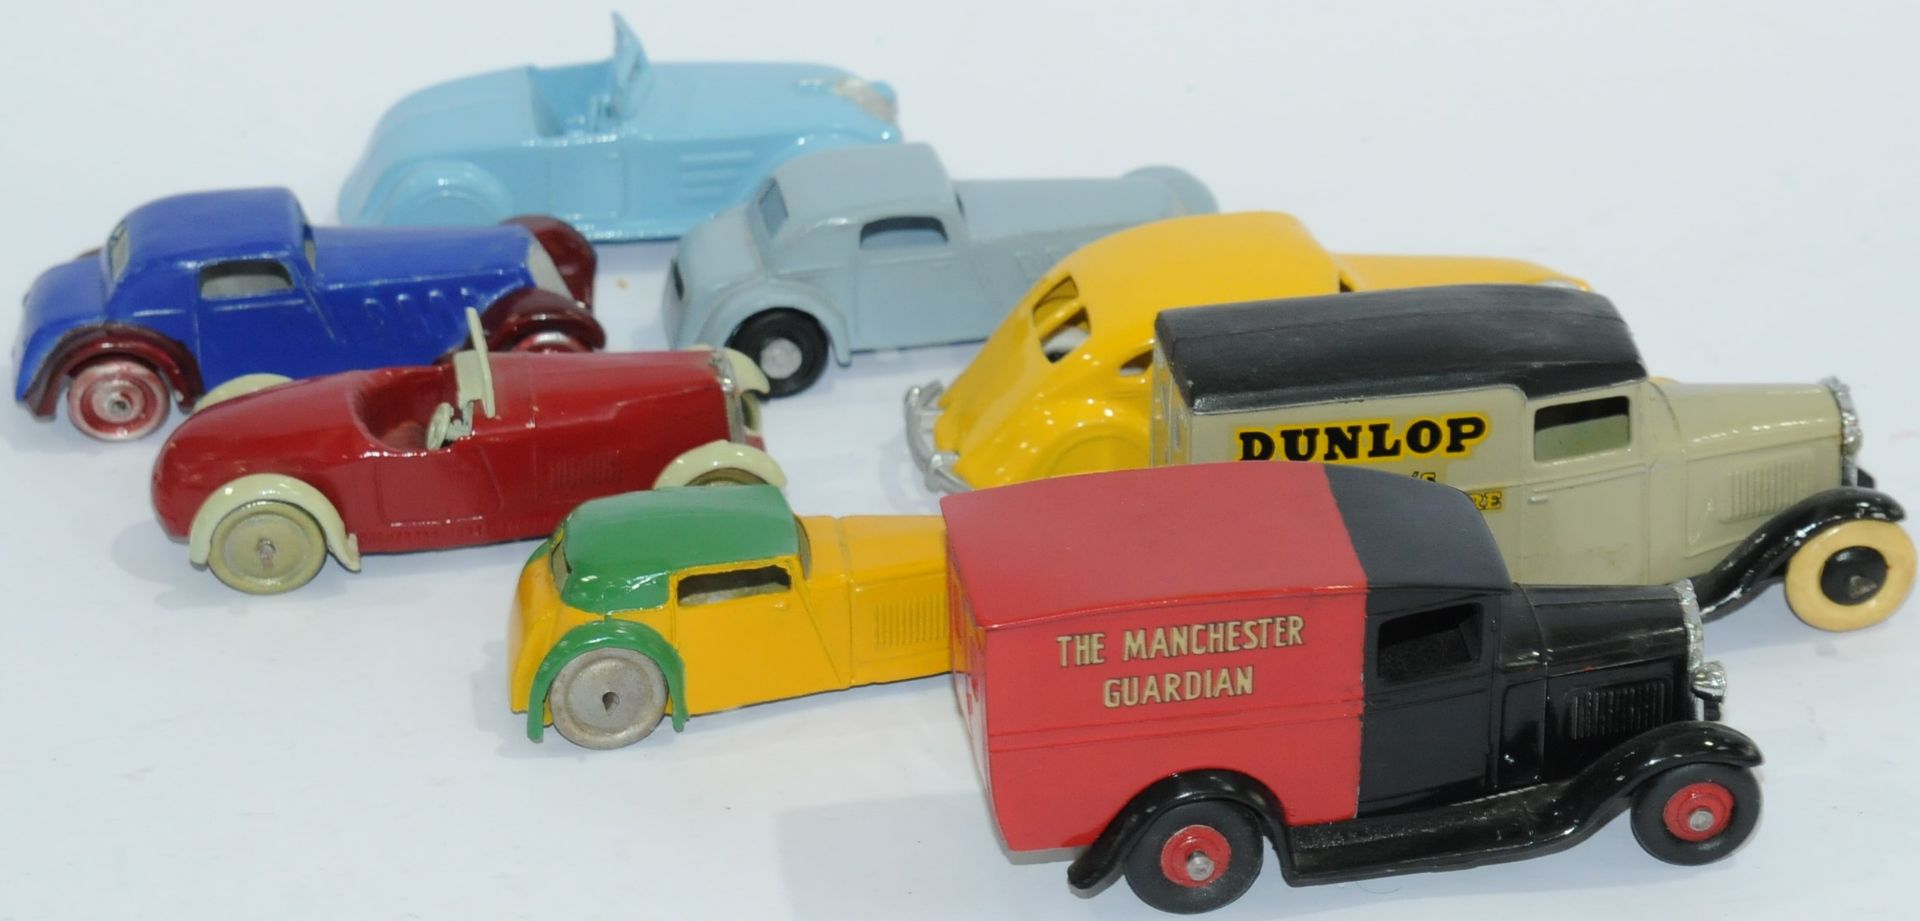 DG models or Simliar an unboxed group of classic cars and vans - Image 2 of 2